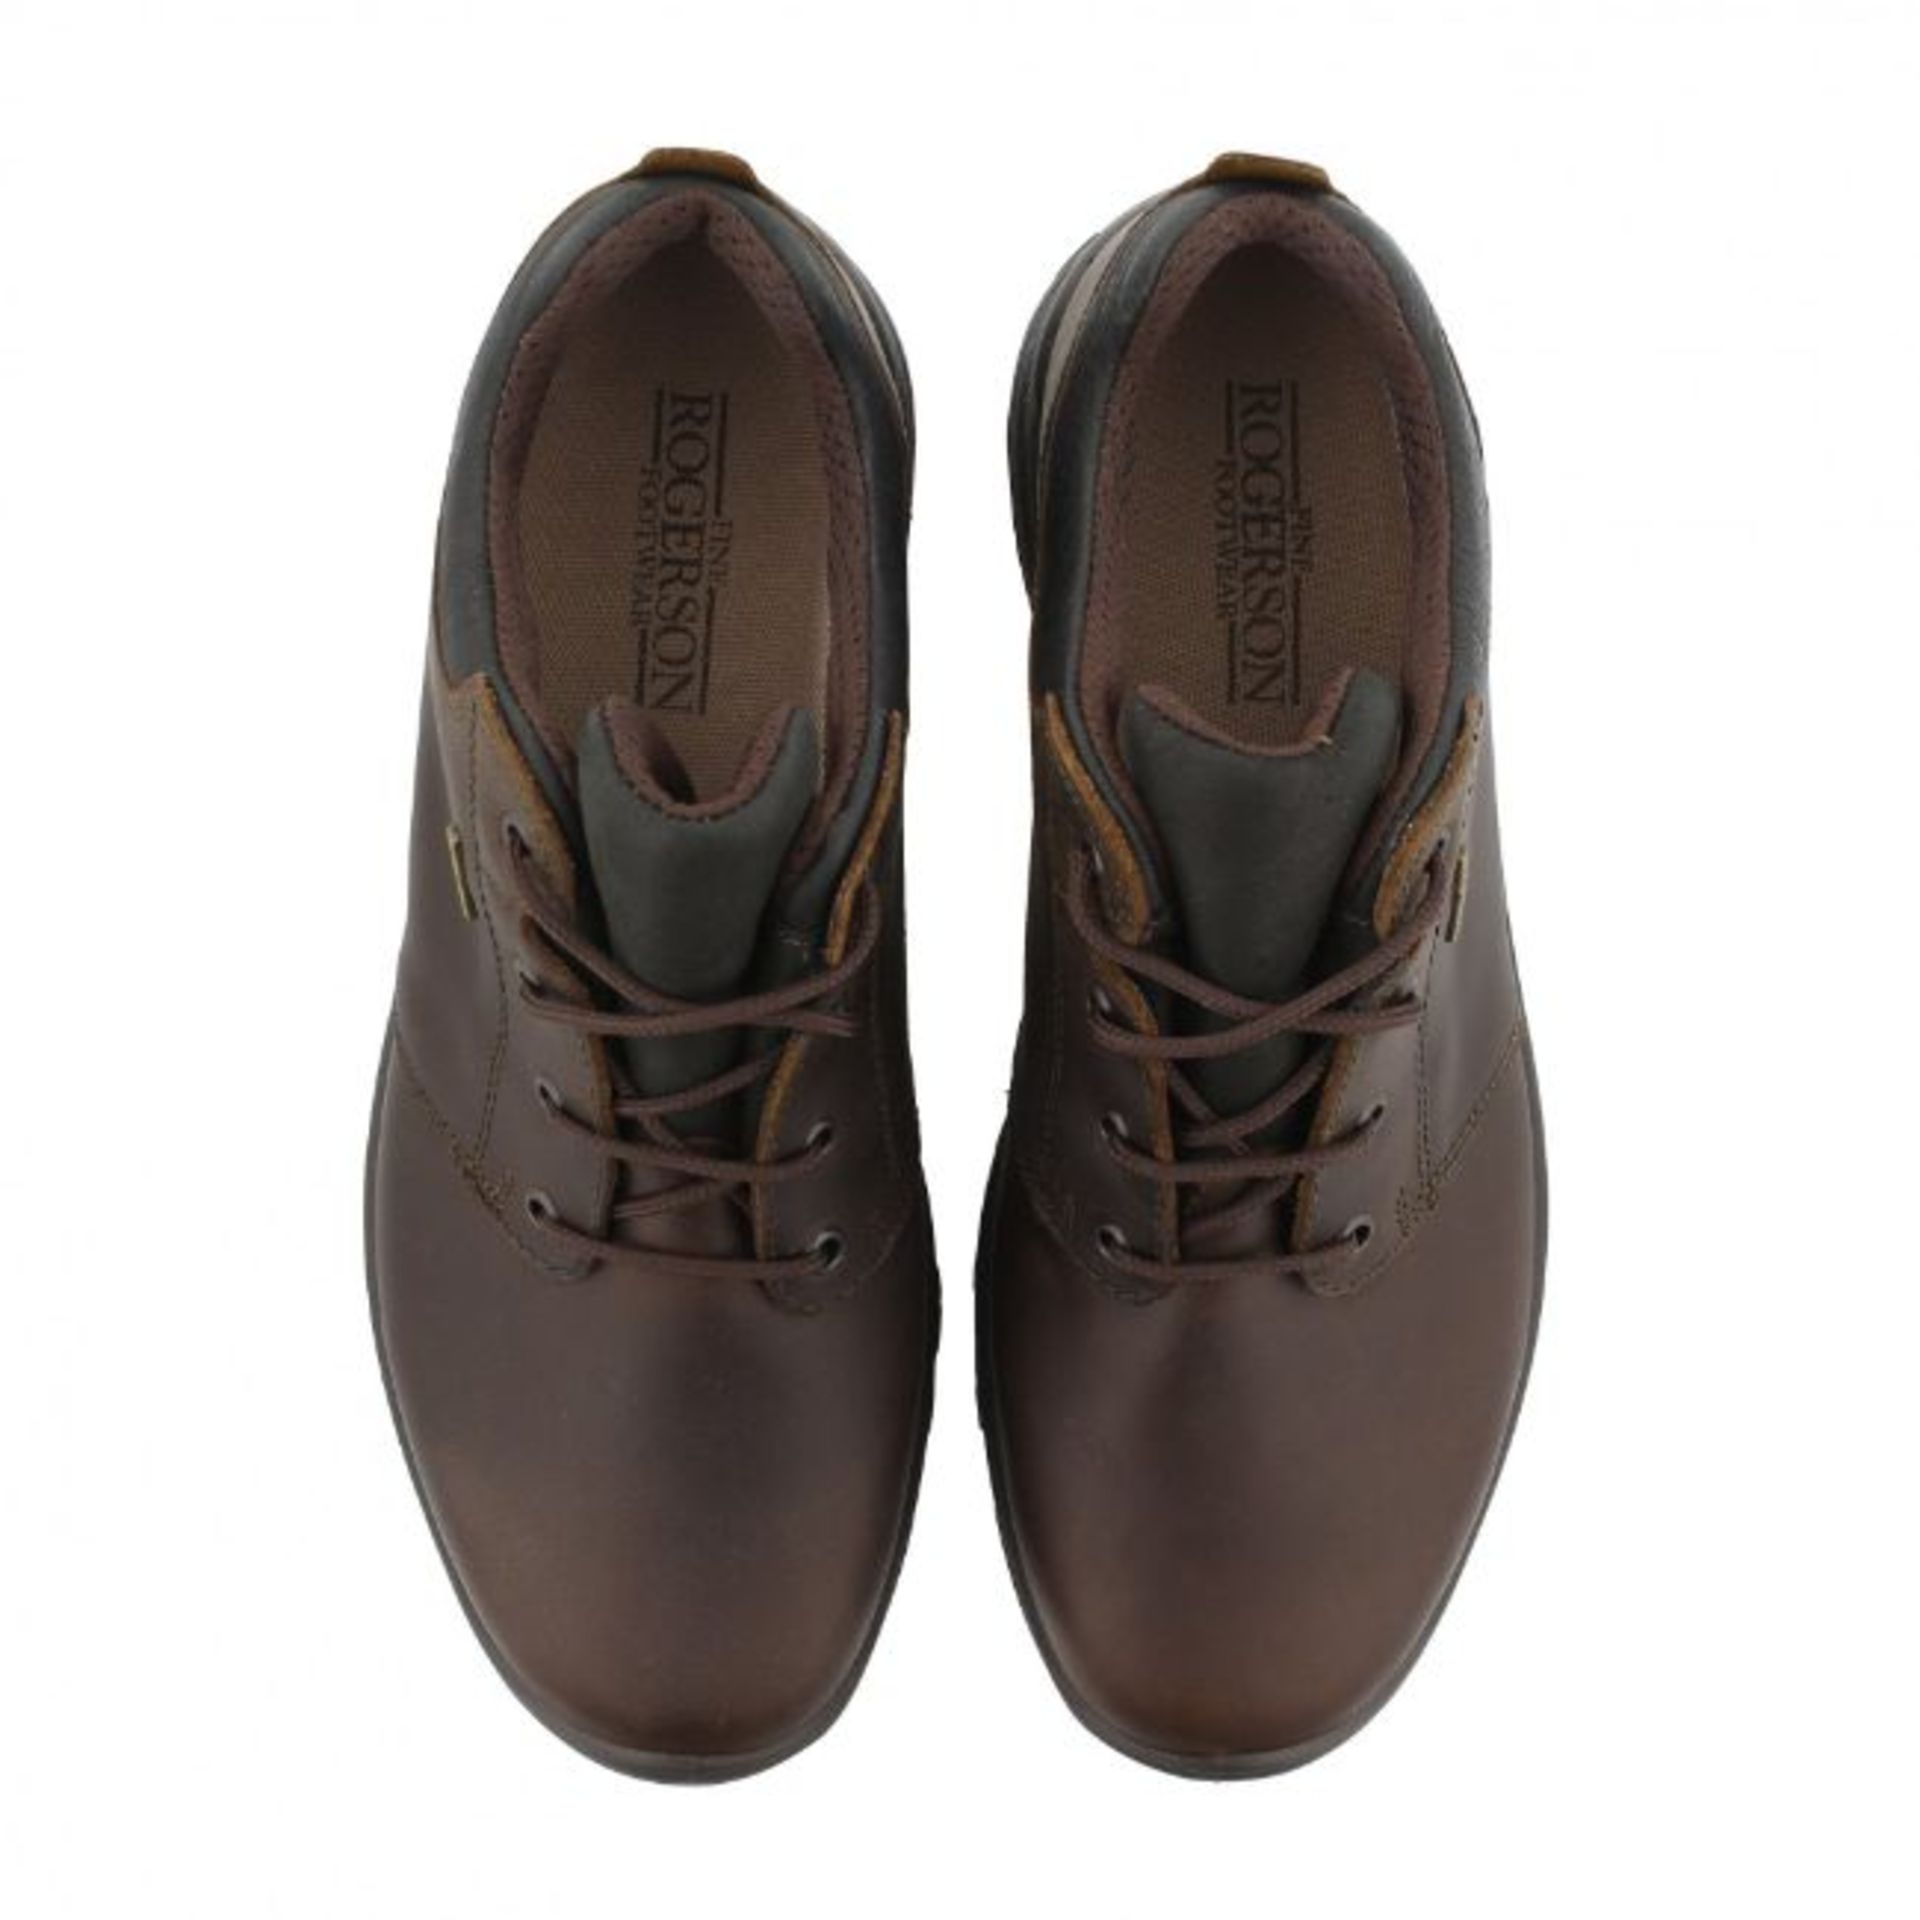 1 x Pair of Men's Grisport Brown Leather GriTex Shoes - Rogerson Footwear - Brand New and Boxed - - Image 2 of 5